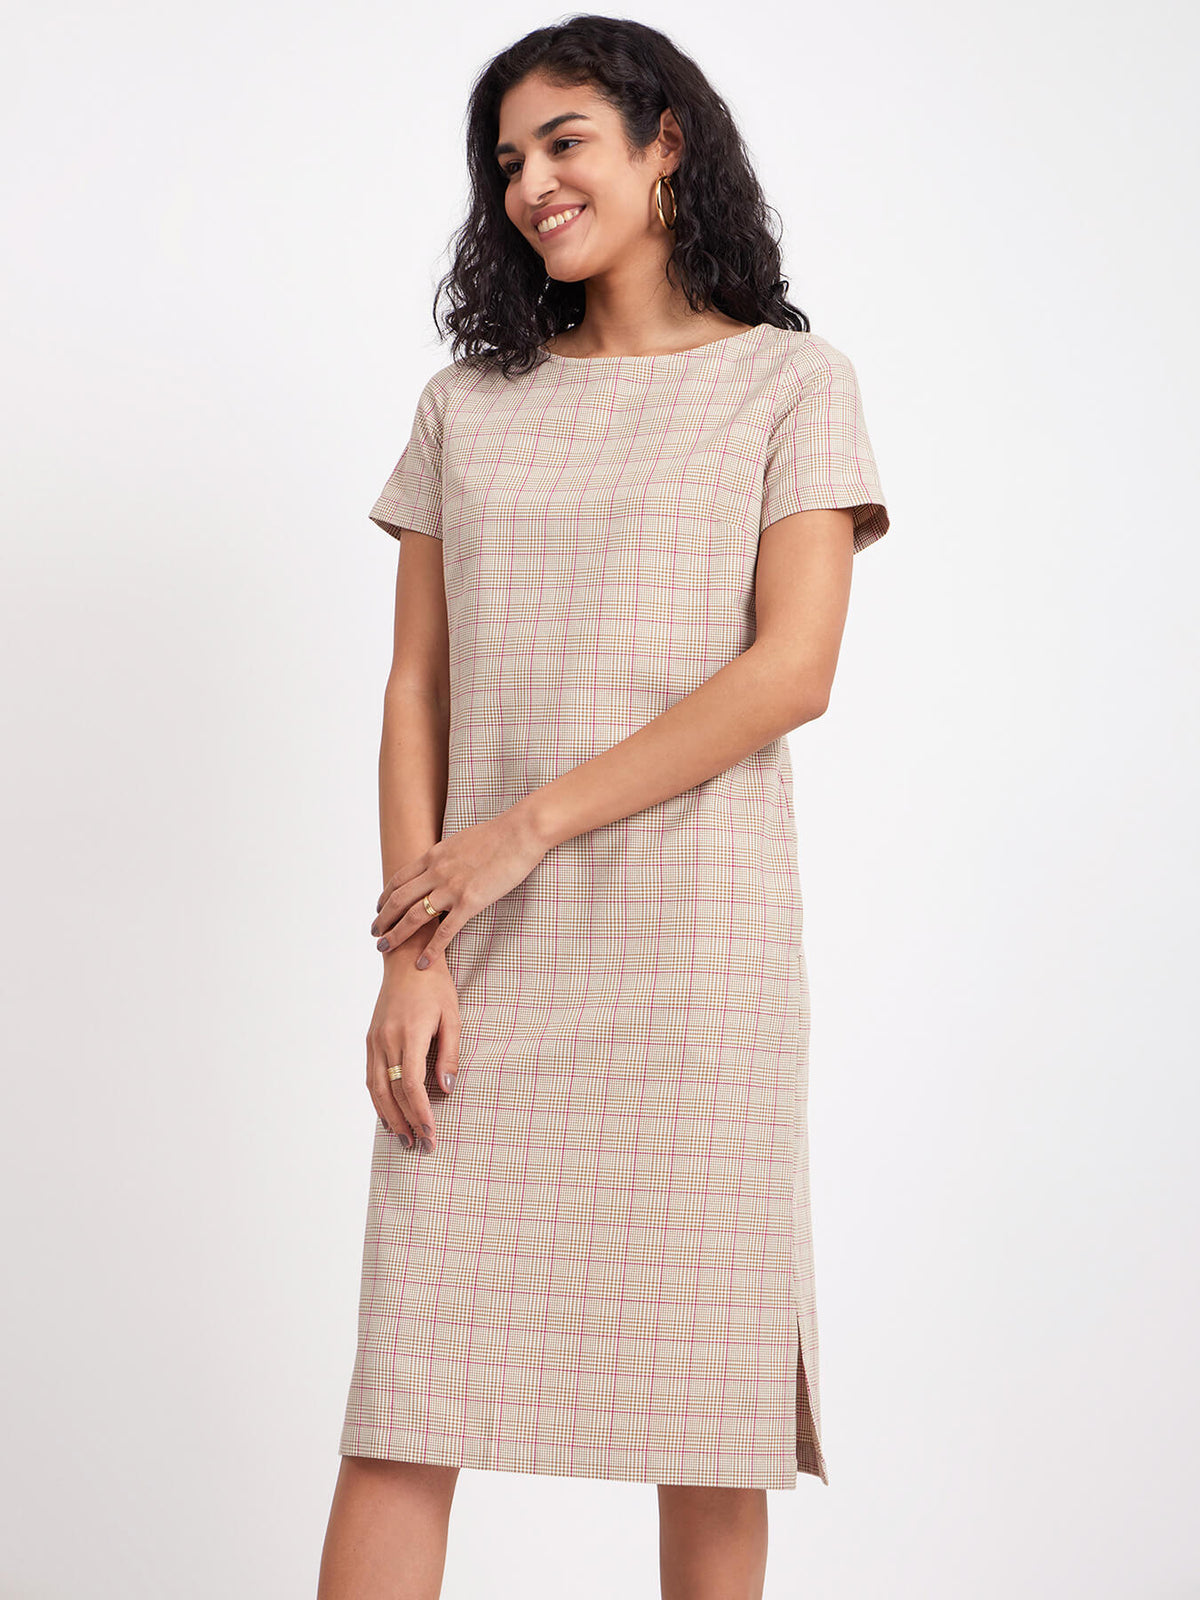 Checkered Boat Neck Dress - Beige And White